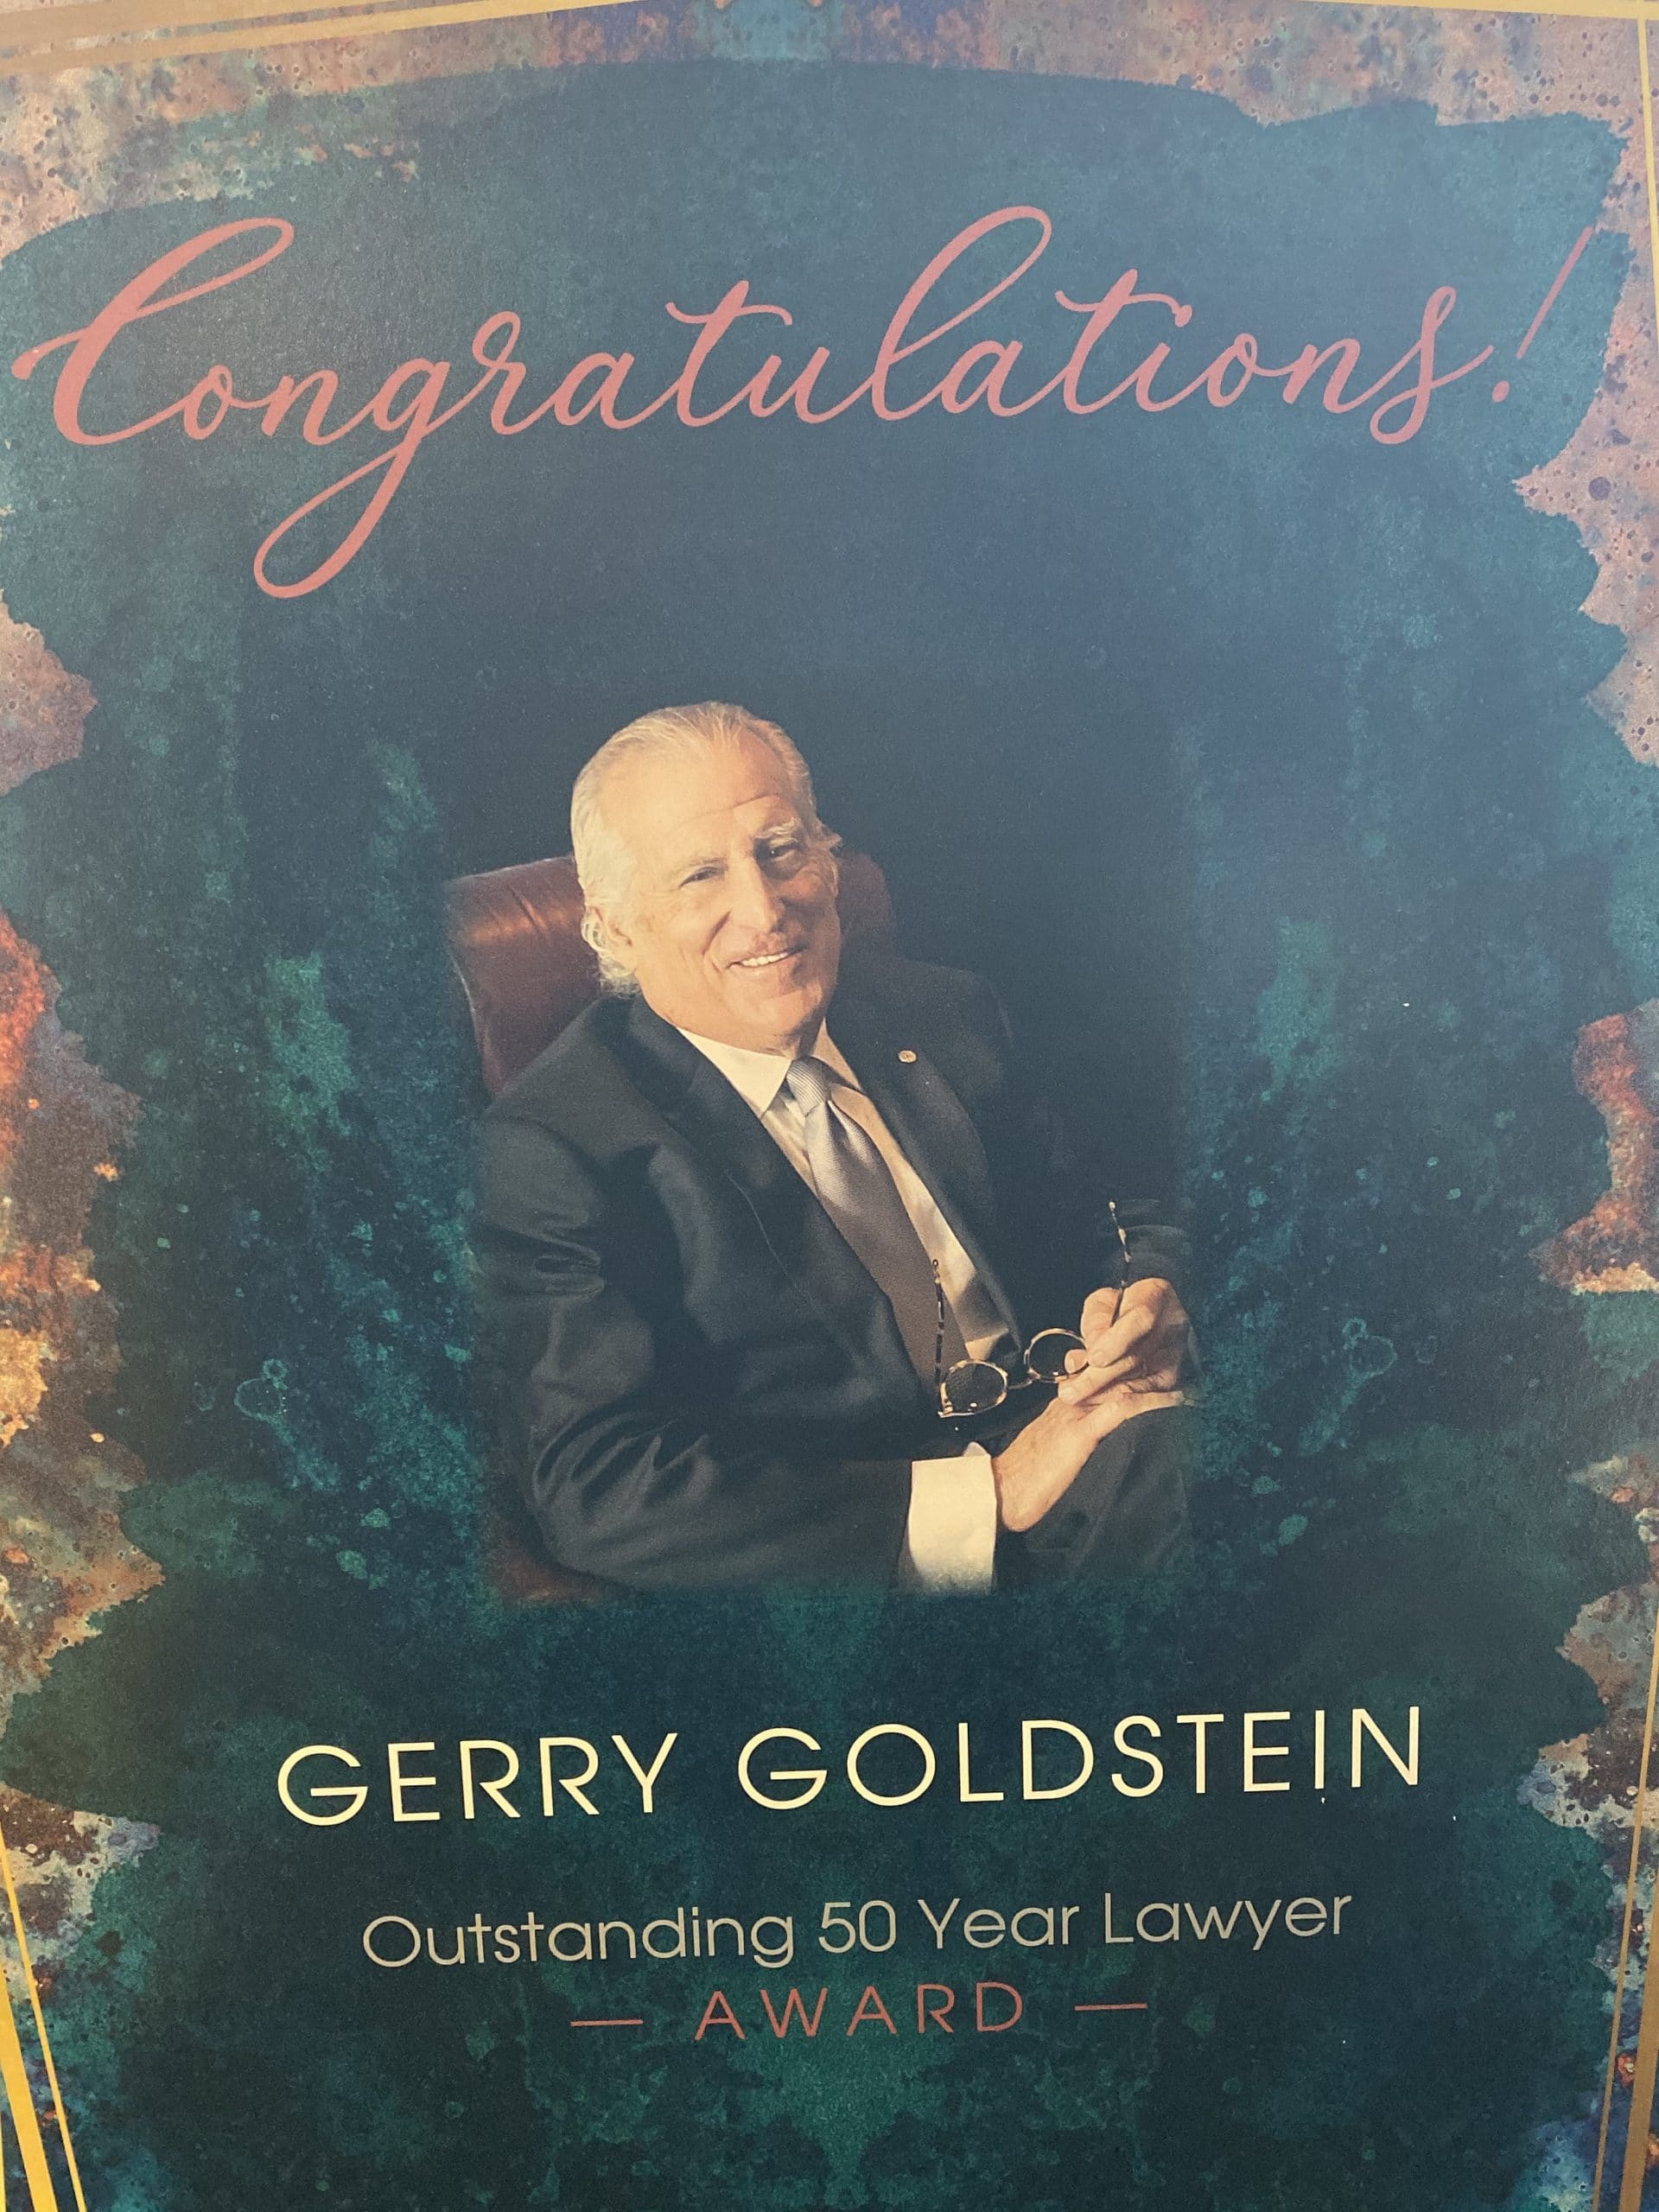 Gerry Goldstein Honored by Texas Bar Foundation